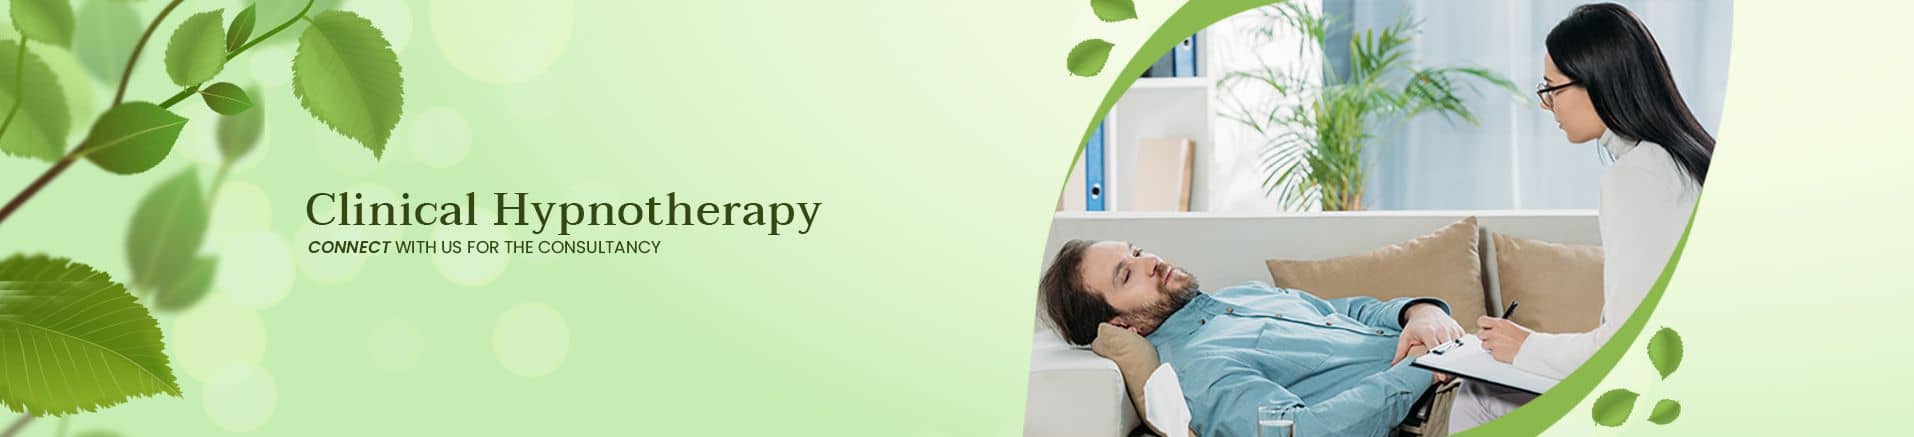 Clinical Hypnotherapy Center in Karachi